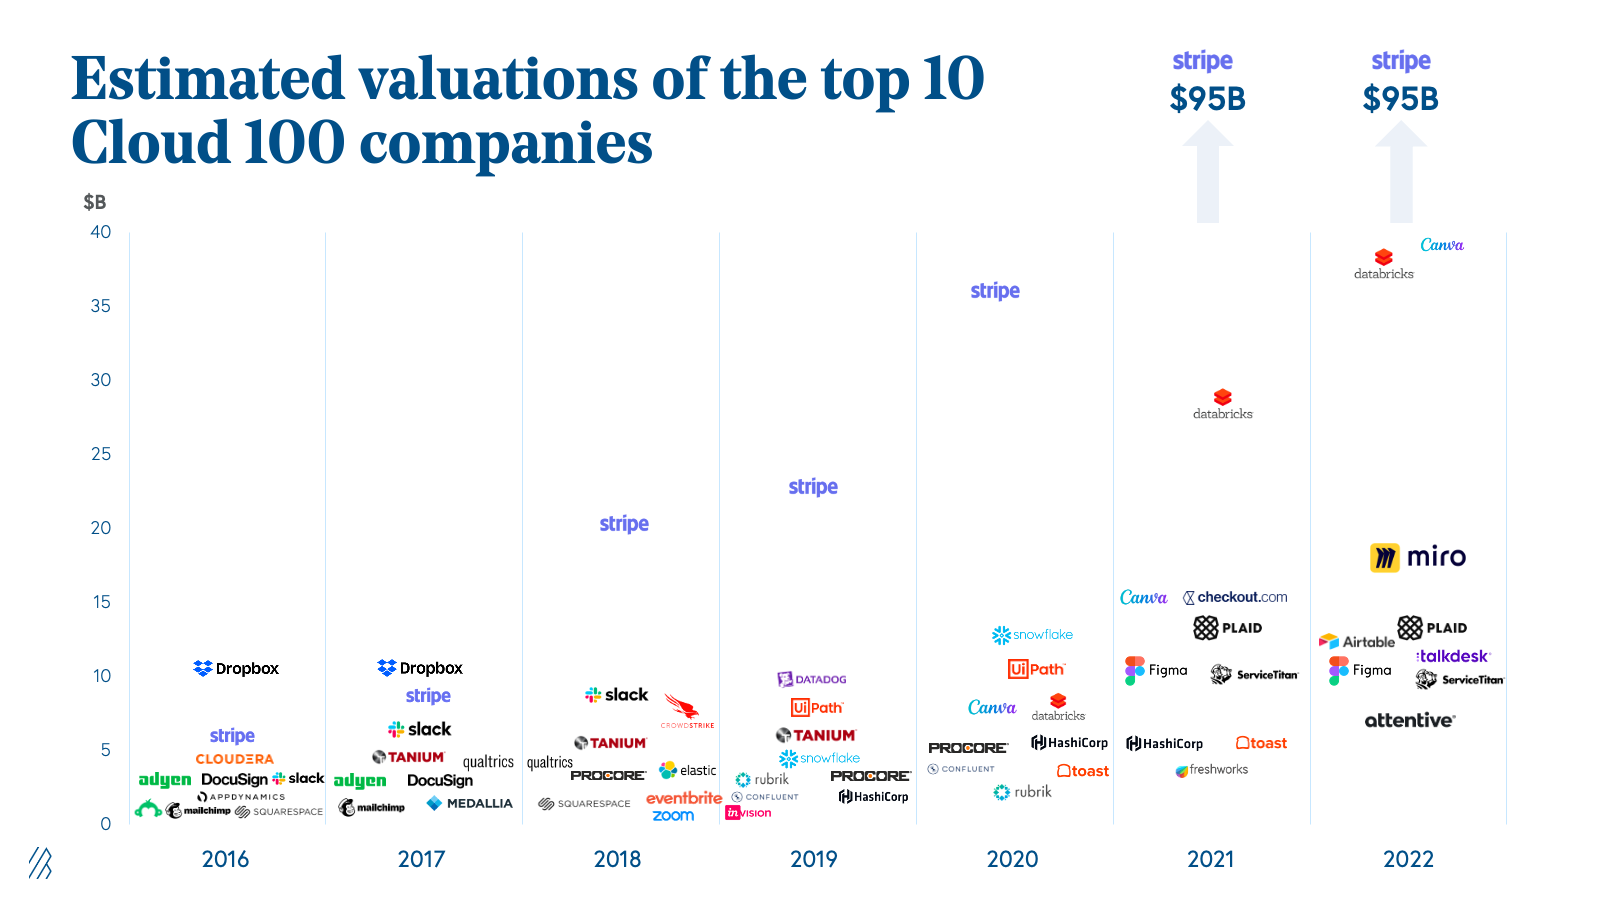 Estimated valuations of the top 10 Cloud 100 companies